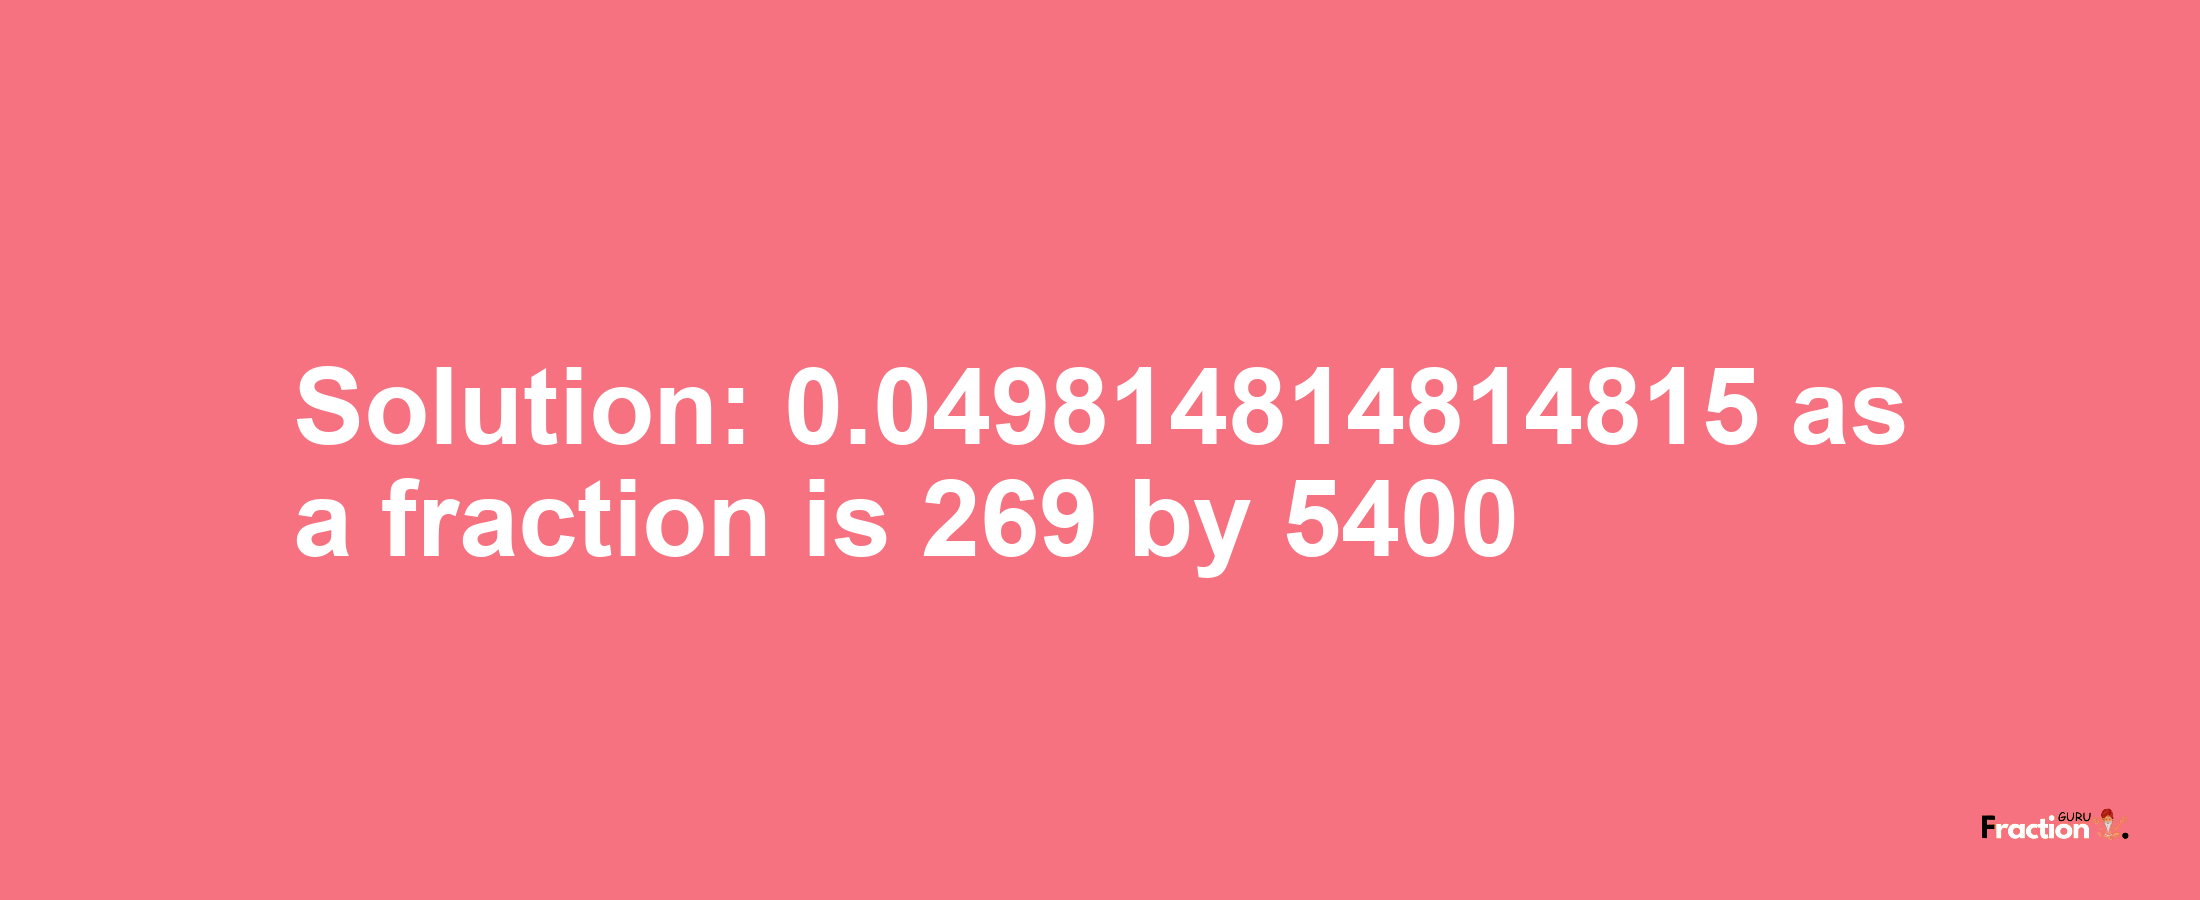 Solution:0.049814814814815 as a fraction is 269/5400